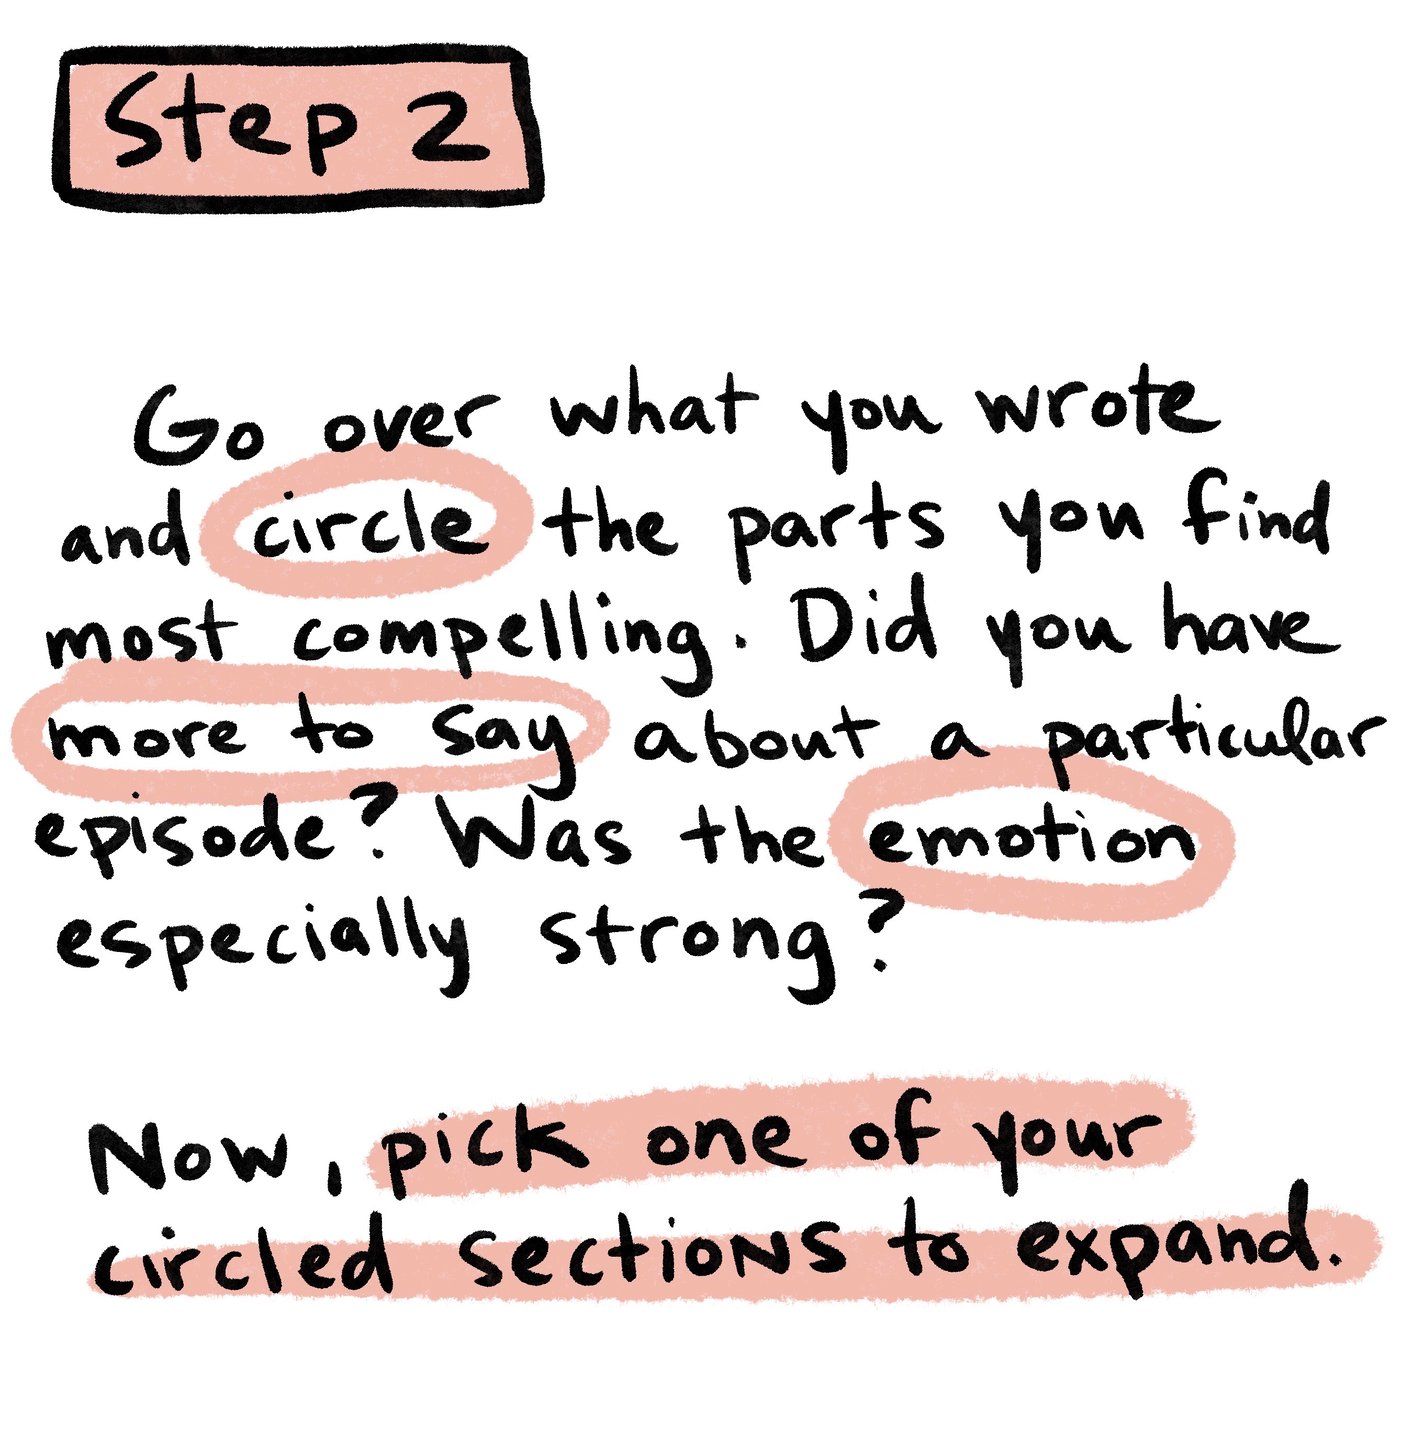 This is Step 2. The text reads: Go over what you wrote and circle the parts you find most compelling. Did you have more to say about a particular episode? Was the emotion especially strong? Now, pick one of you circled sections to expand.